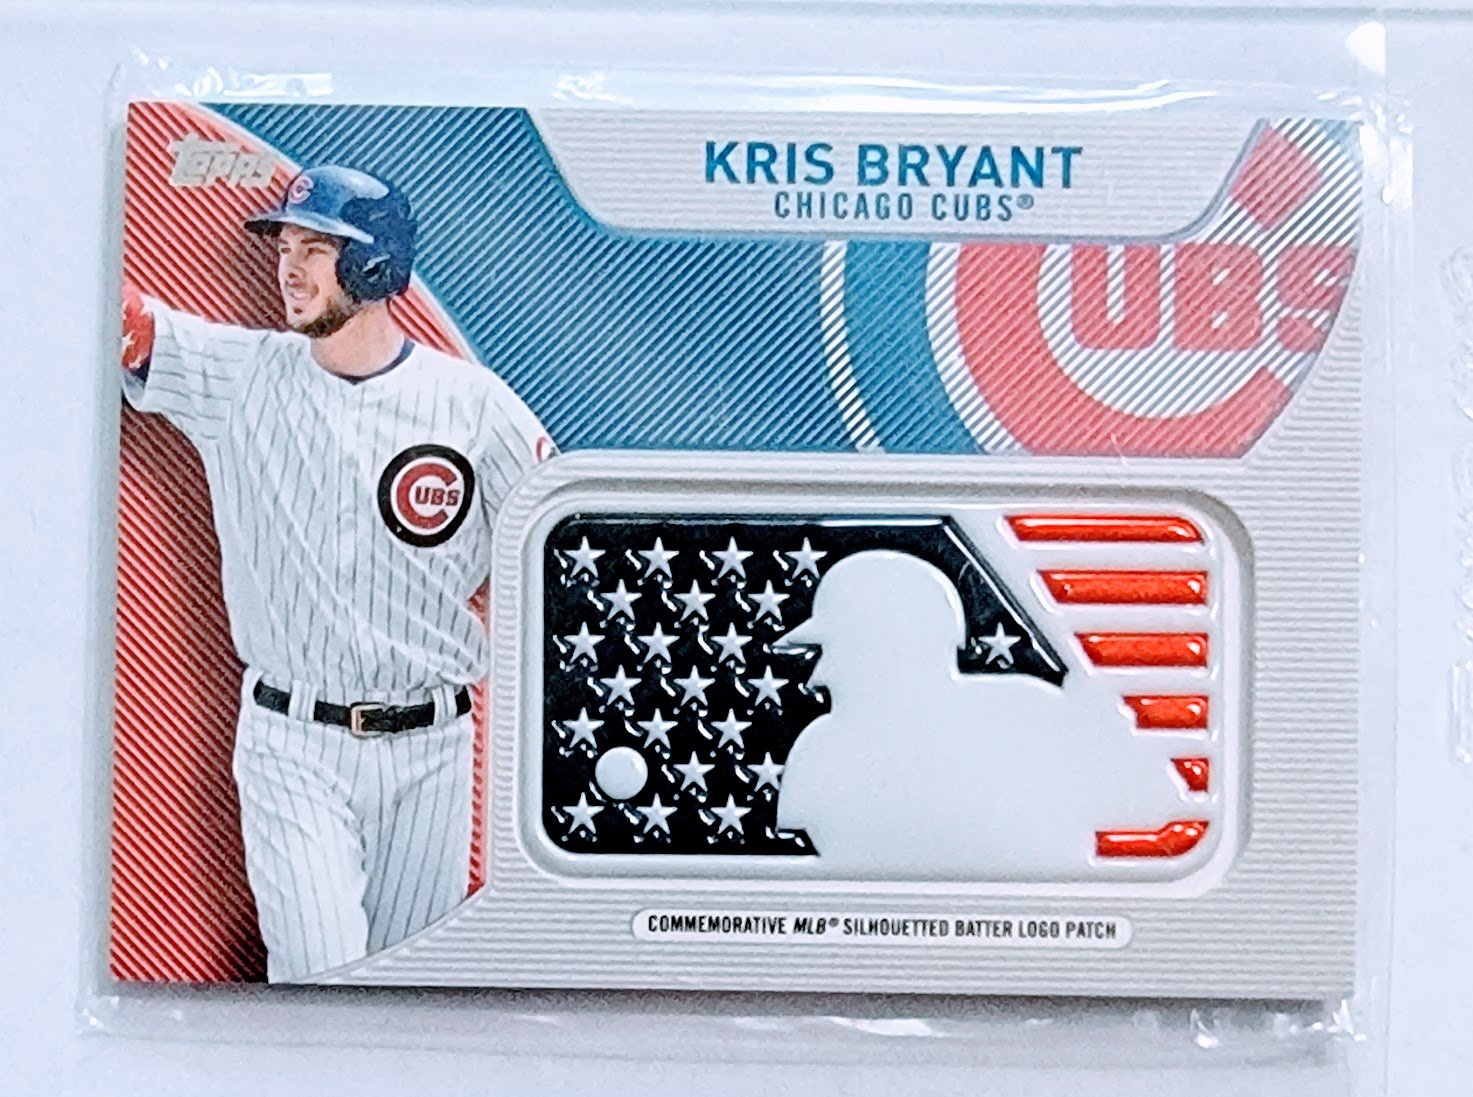 2017 Topps Kris Bryant MLB Independence Day Silhouetted Batter Logo Patch Baseball Card TPTV simple Xclusive Collectibles   